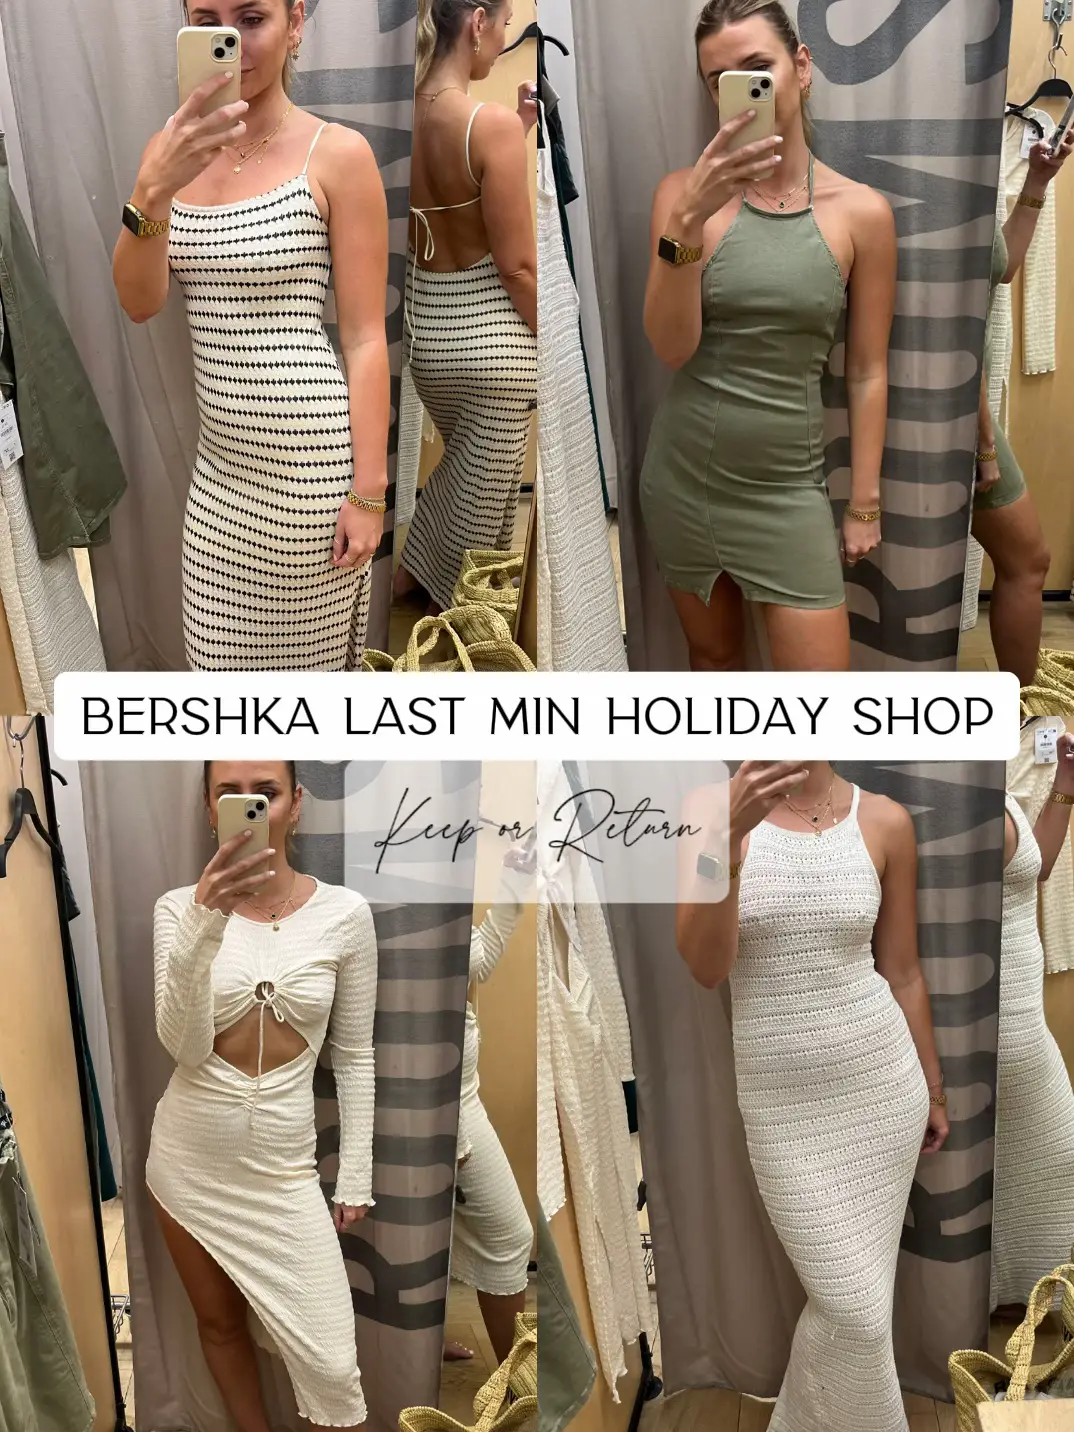 WHICH BERSHKA DRESS SHOULD I BUY? 💗, Gallery posted by keirabuckley